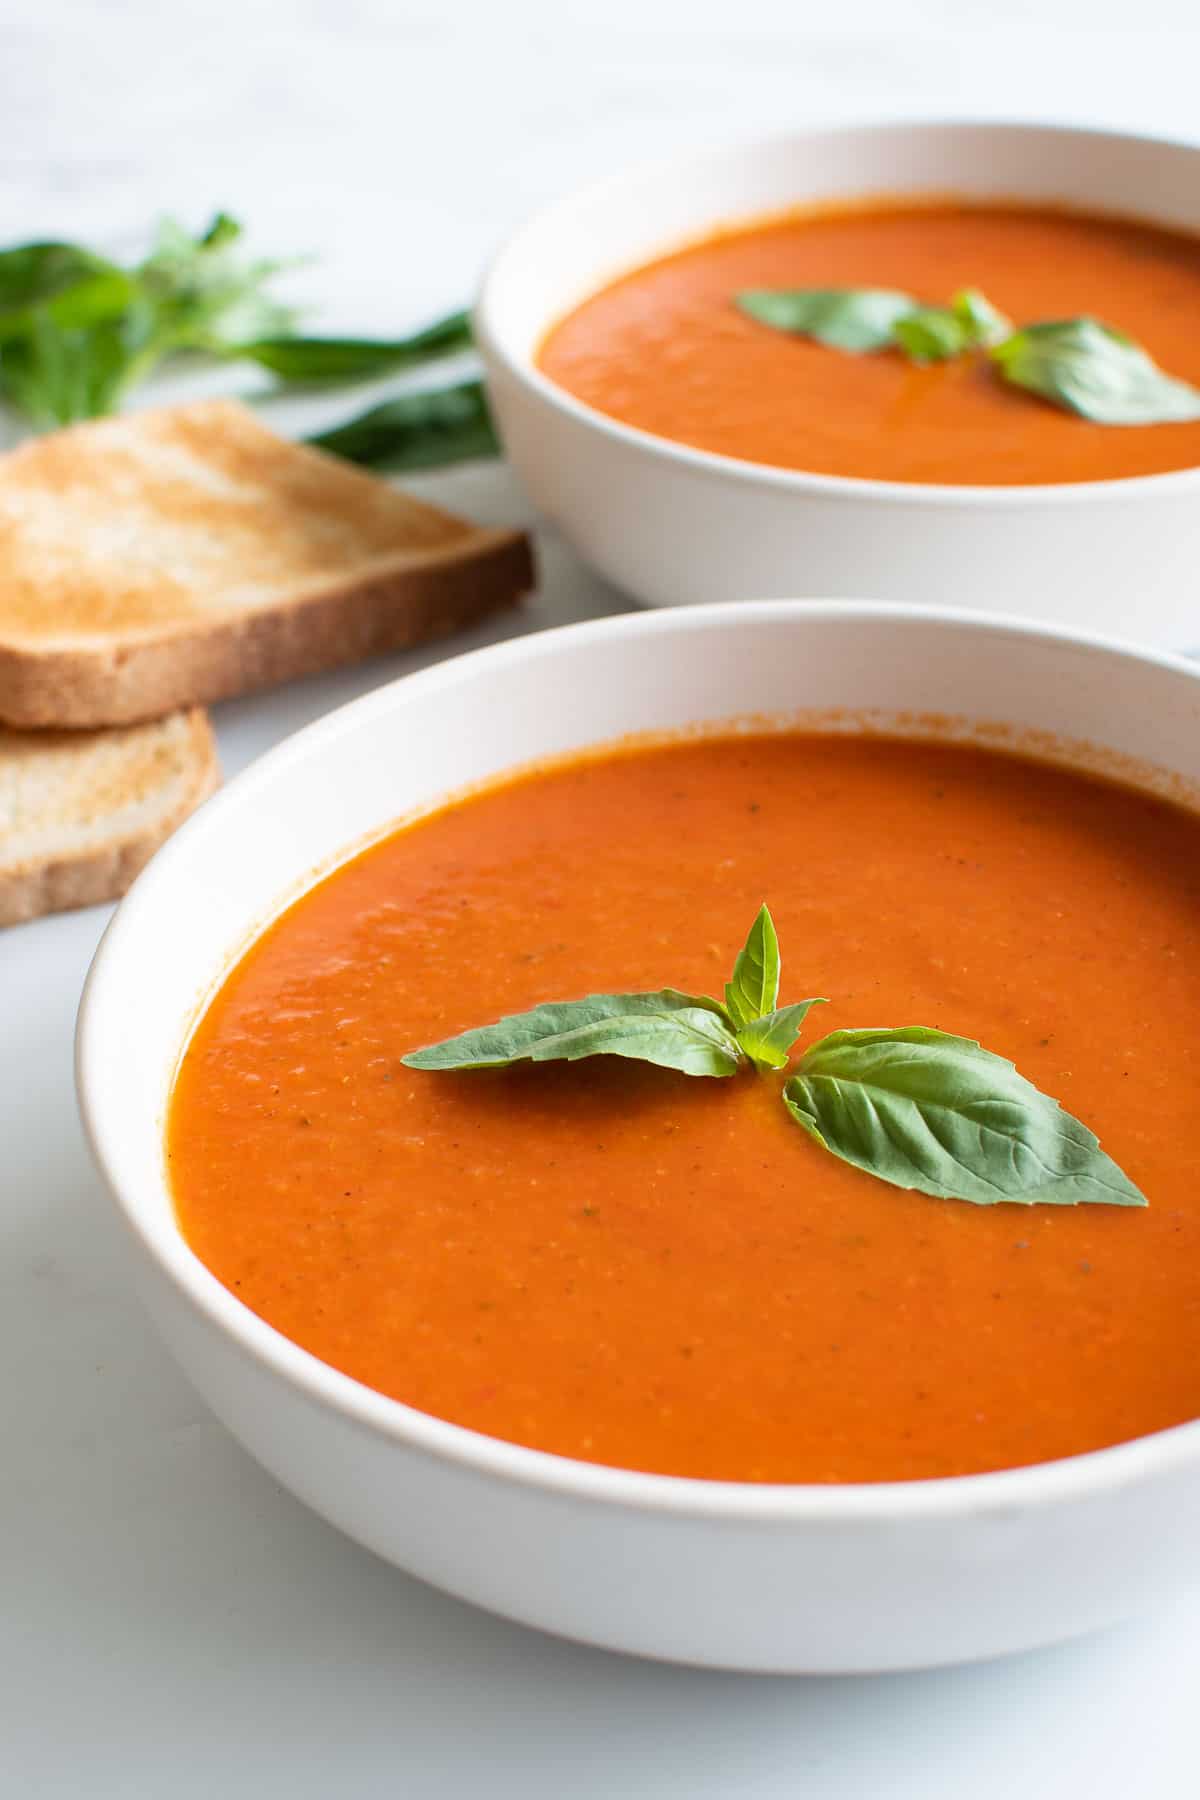 https://www.hintofhealthy.com/wp-content/uploads/2021/10/Spicy-Tomato-Soup-3.jpg